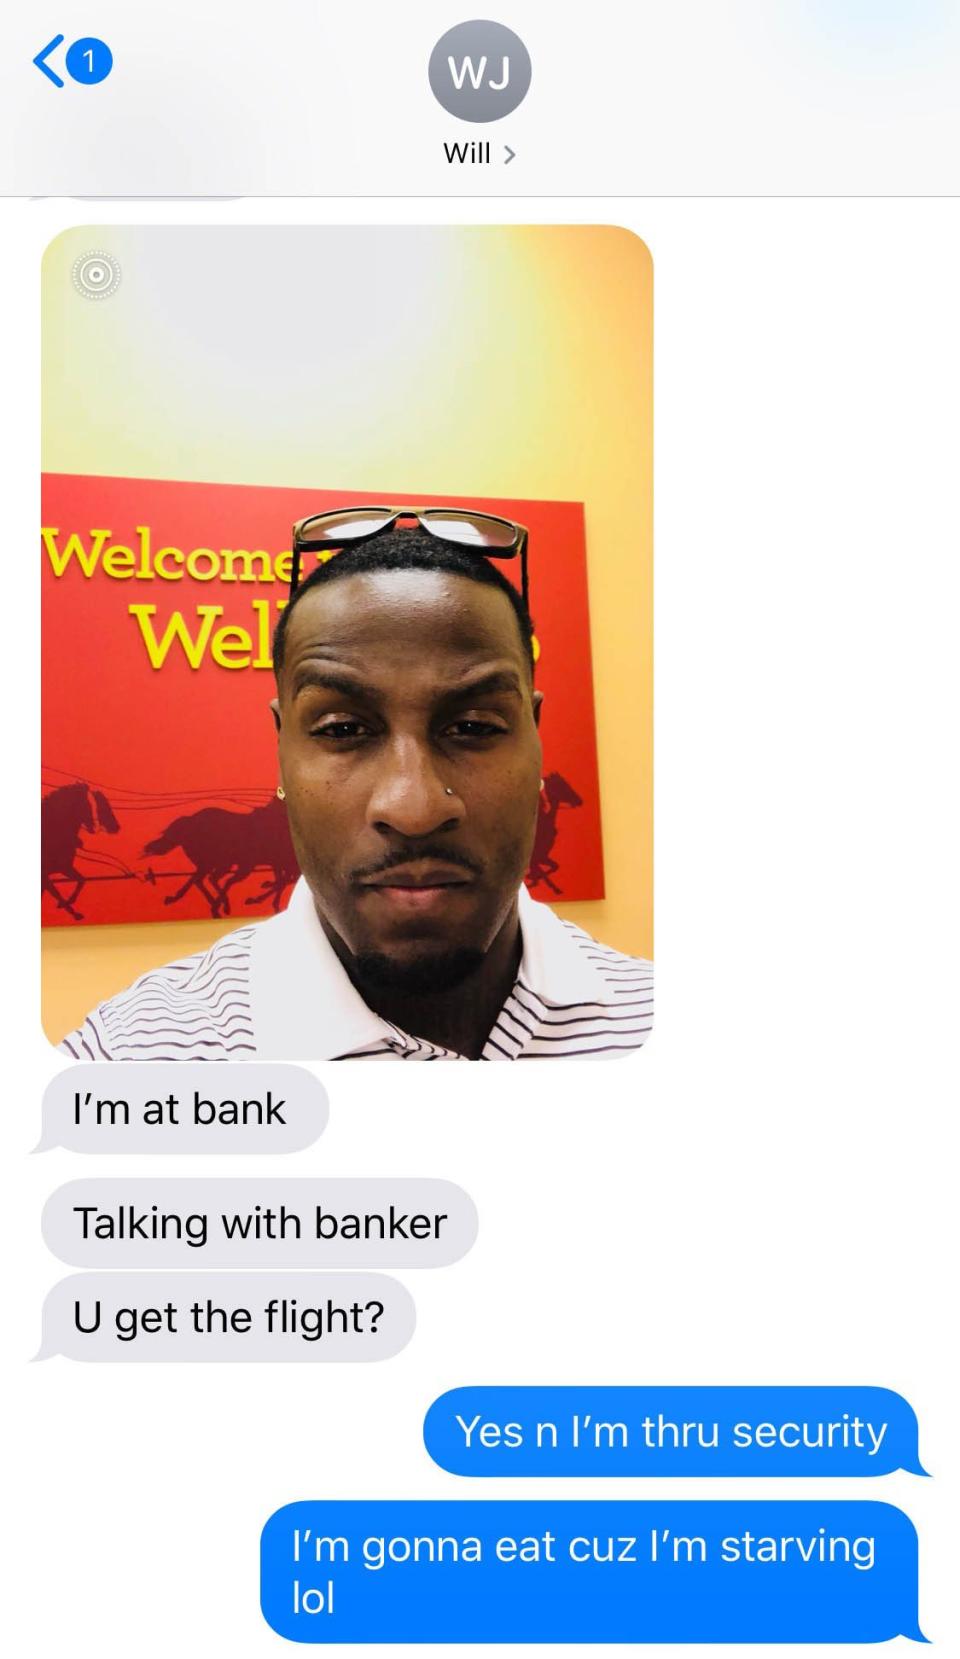 <div class="inline-image__caption"><p>Jackson sent Oudinot a selfie from a bank to reassure her he was getting money for her flight.</p></div> <div class="inline-image__credit">Courtesy Acadia Oudinot</div>